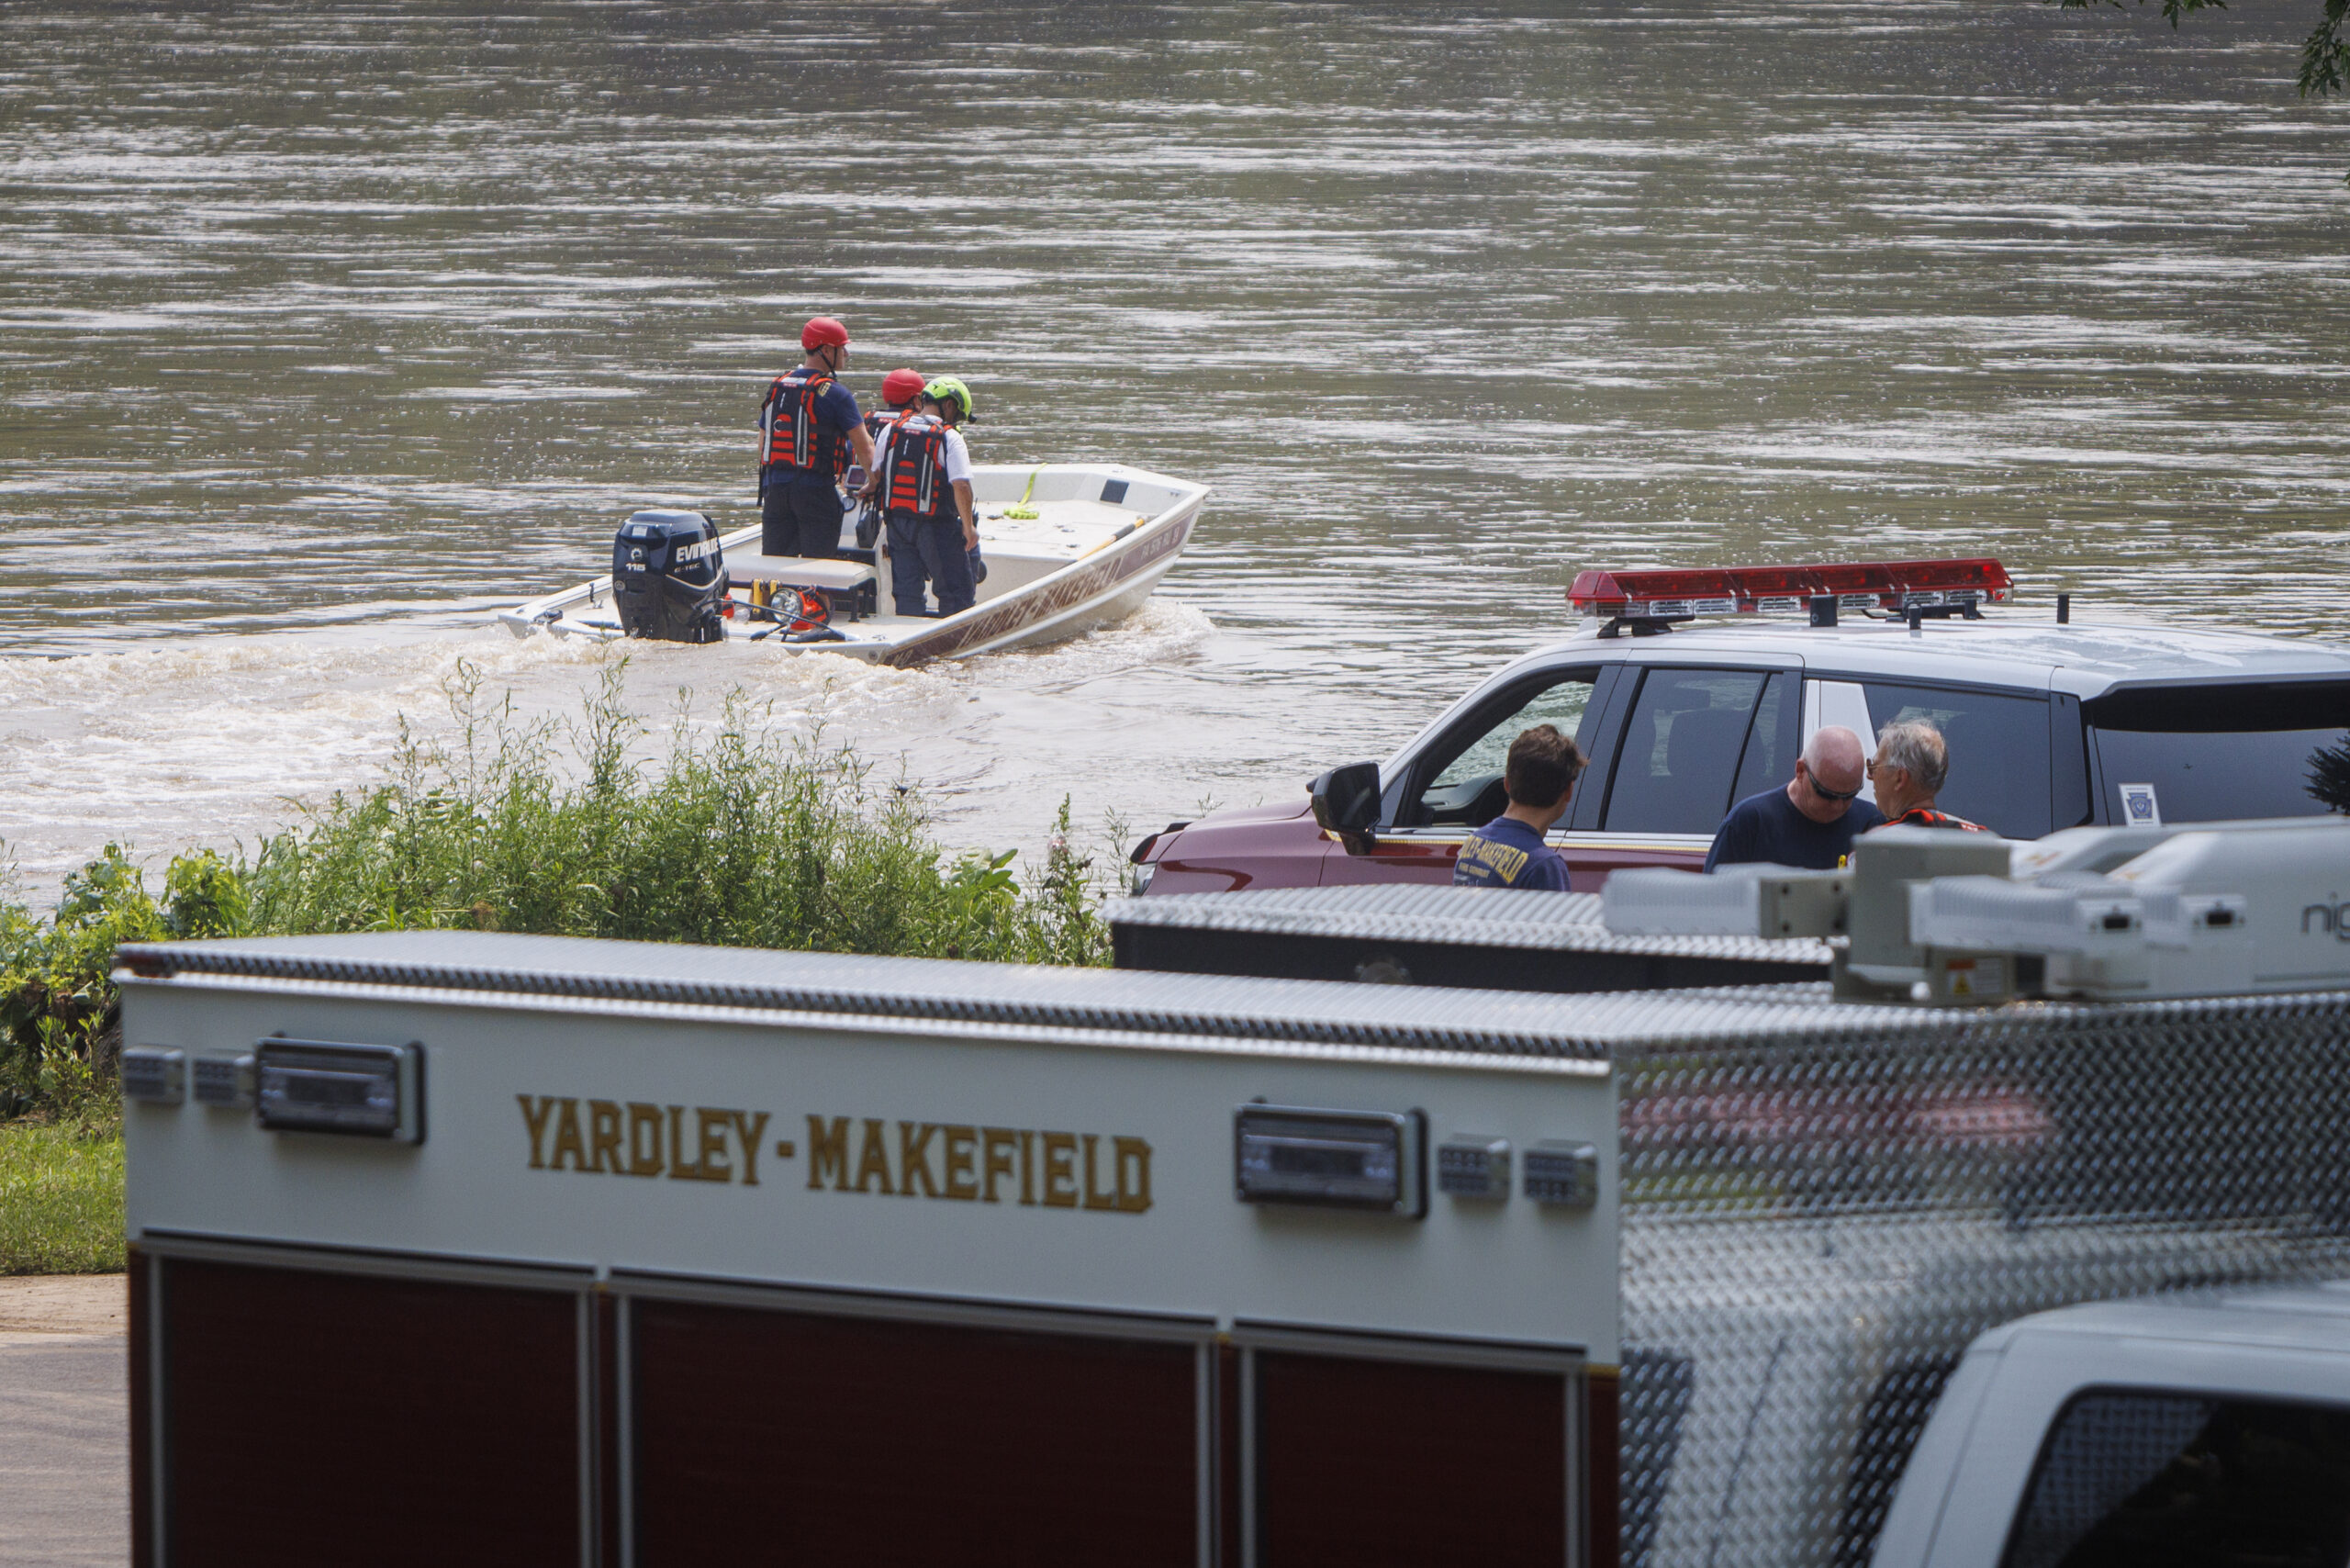 WASHINGTON CROSSING, Pa. (AP) — The family of a 2-year-old girl swept away along with another chi...